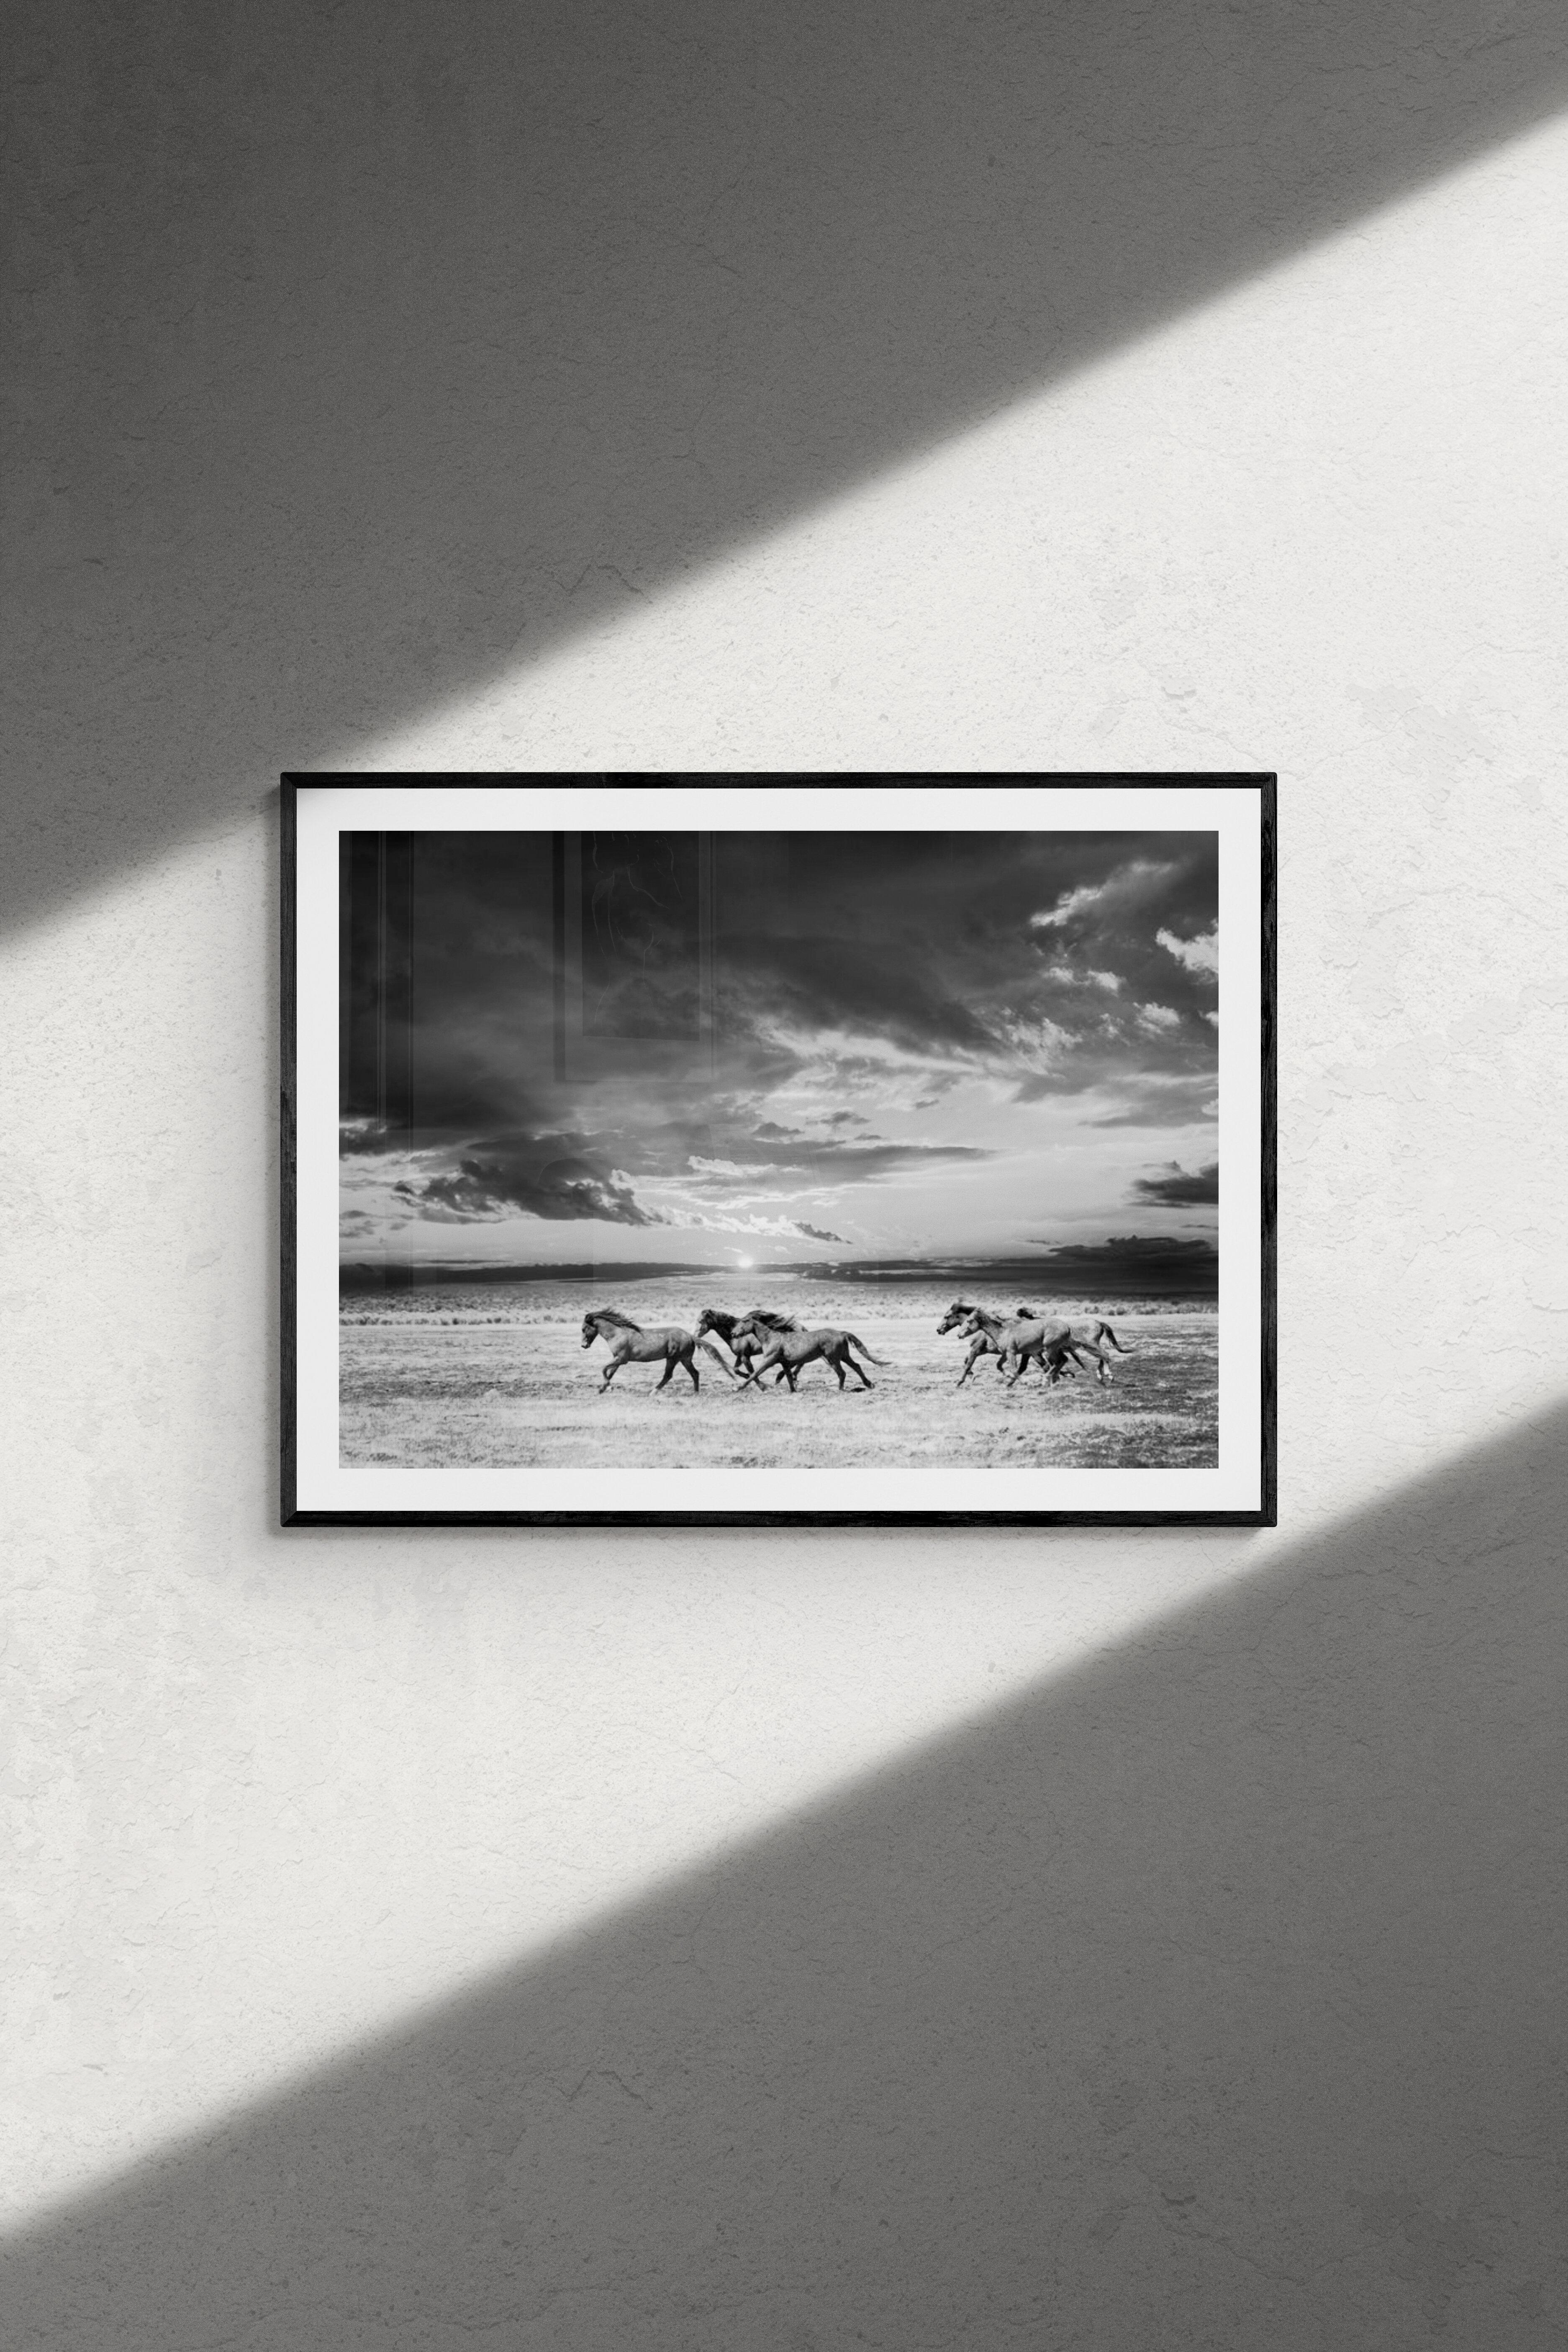 36x48 Photography of Wild Horses - Mustangs Photograph Print Sunset Landscape - Gray Black and White Photograph by Shane Russeck